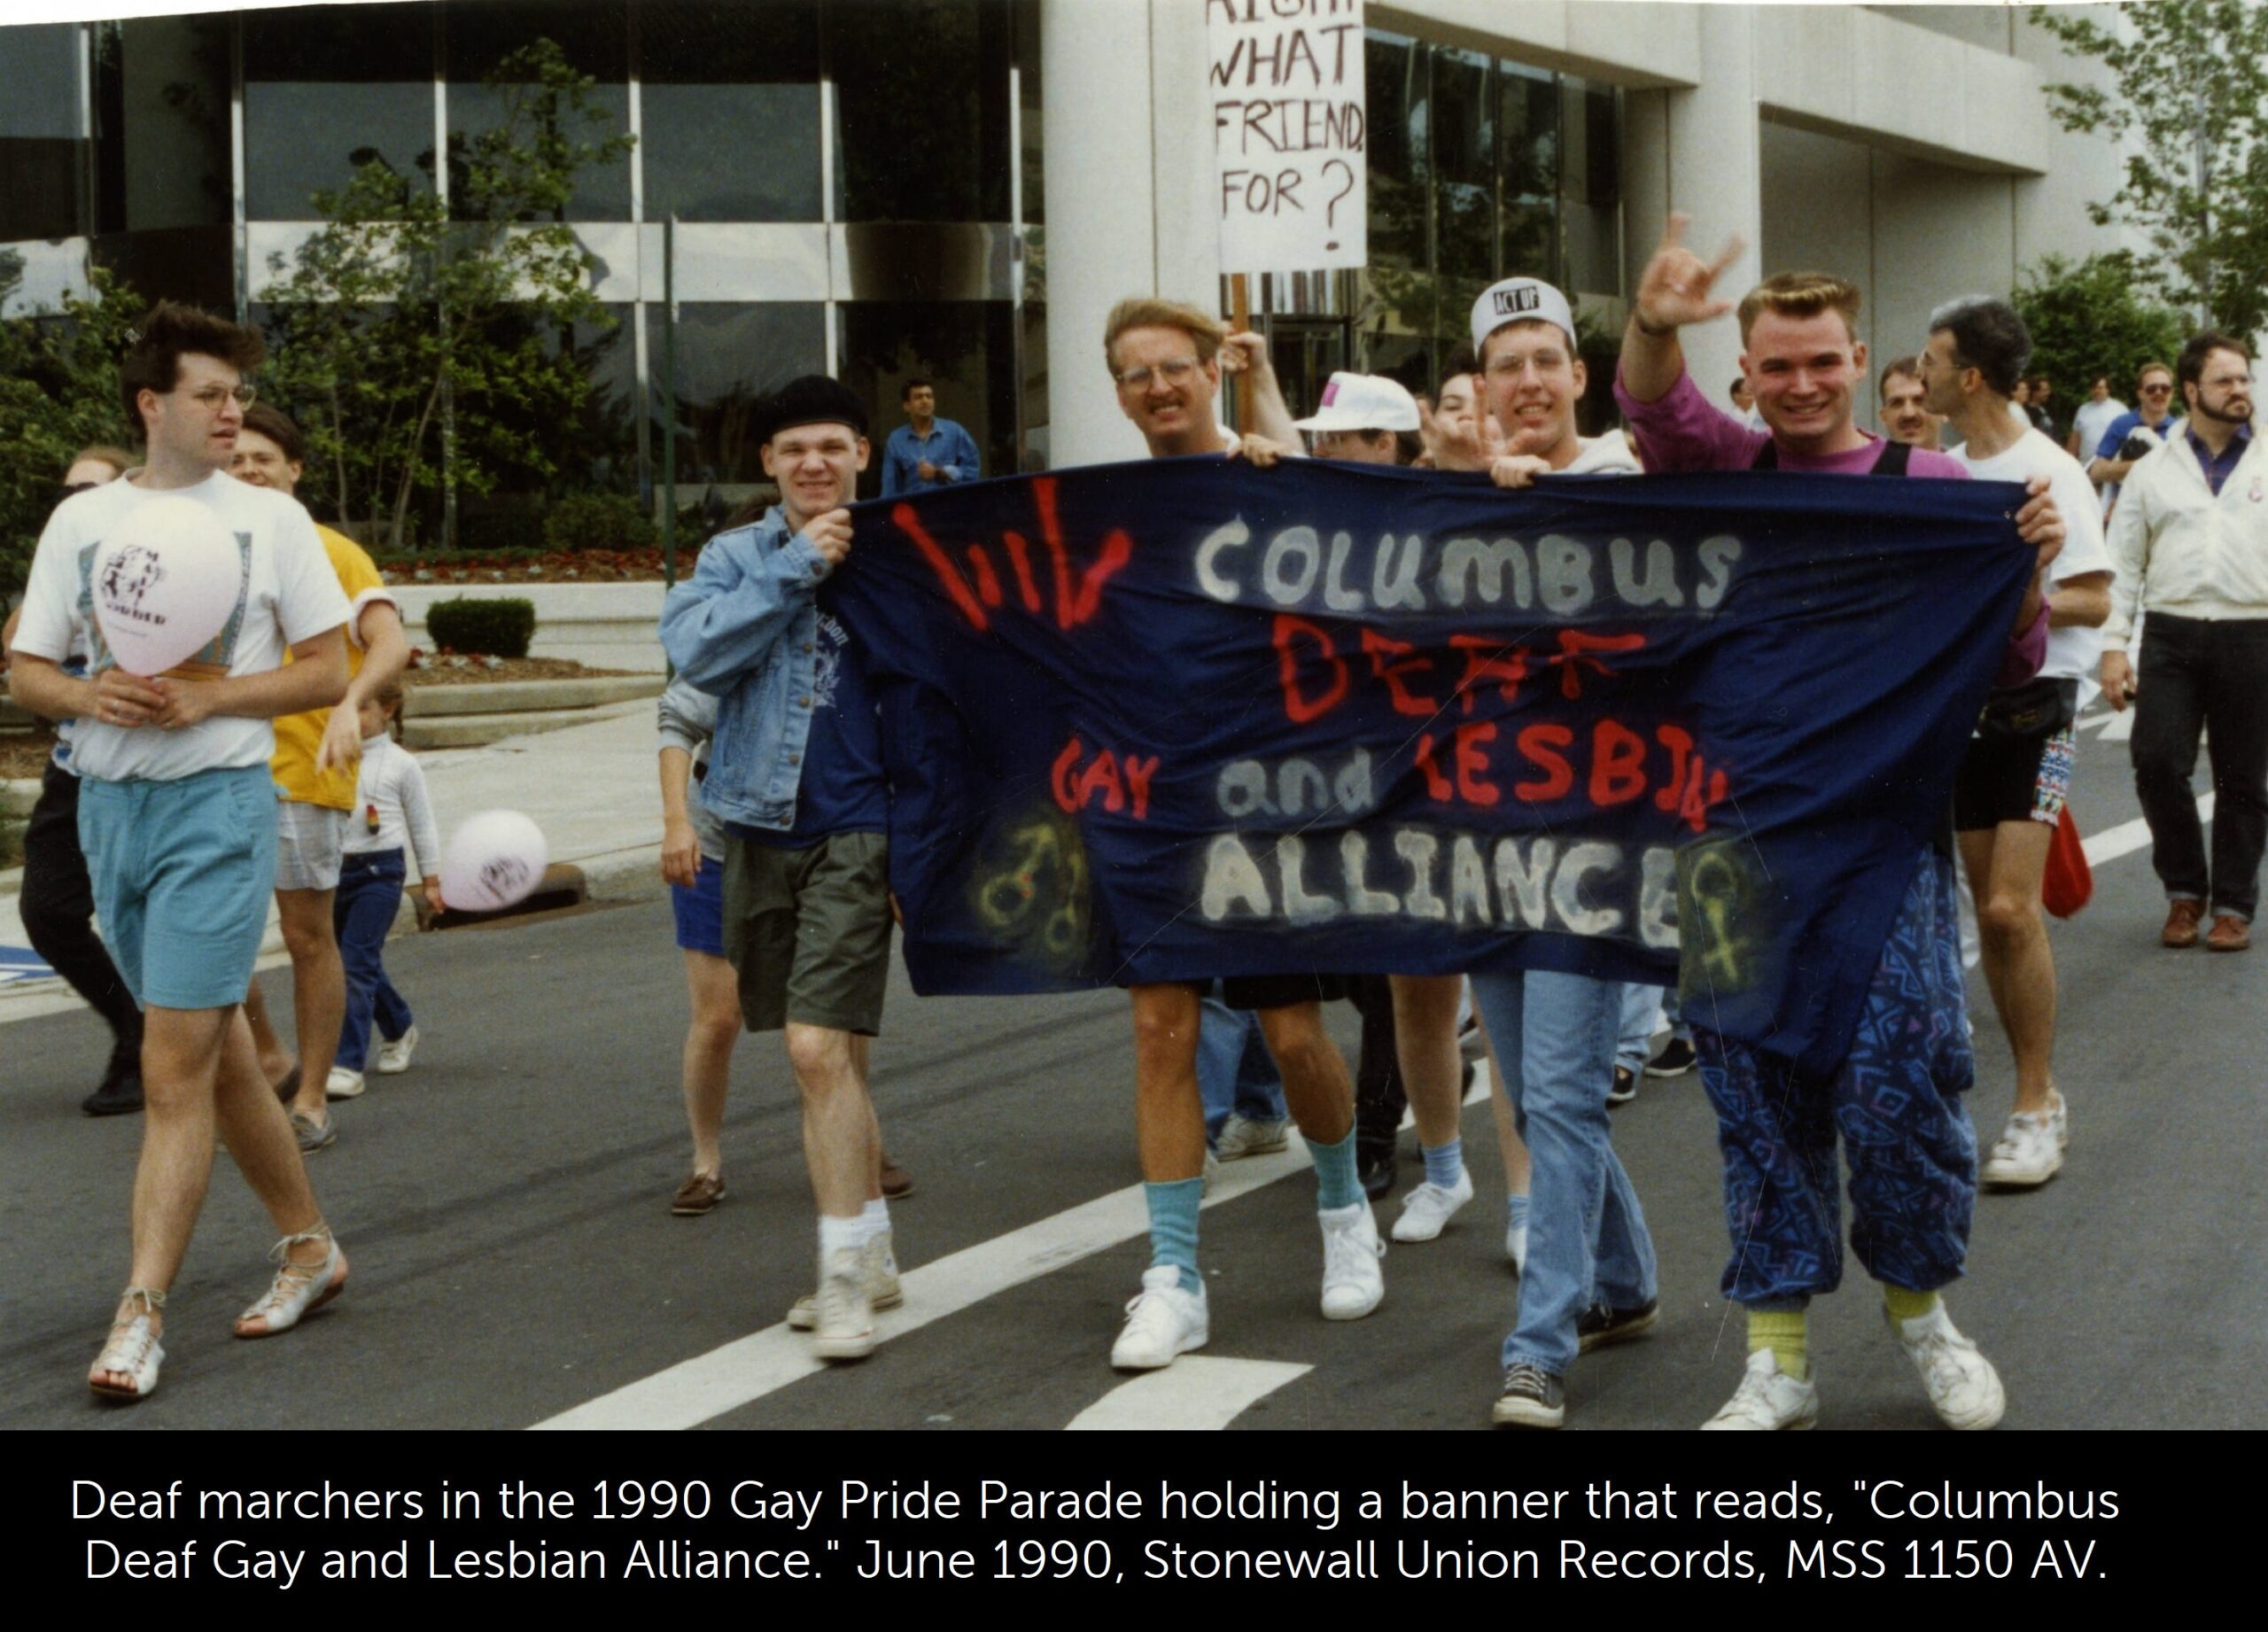 A photo of deaf marchers in the 1990 Gay Pride Parade holding a banner that reads, "Columbus Deaf Gay and Lesbian Alliance"